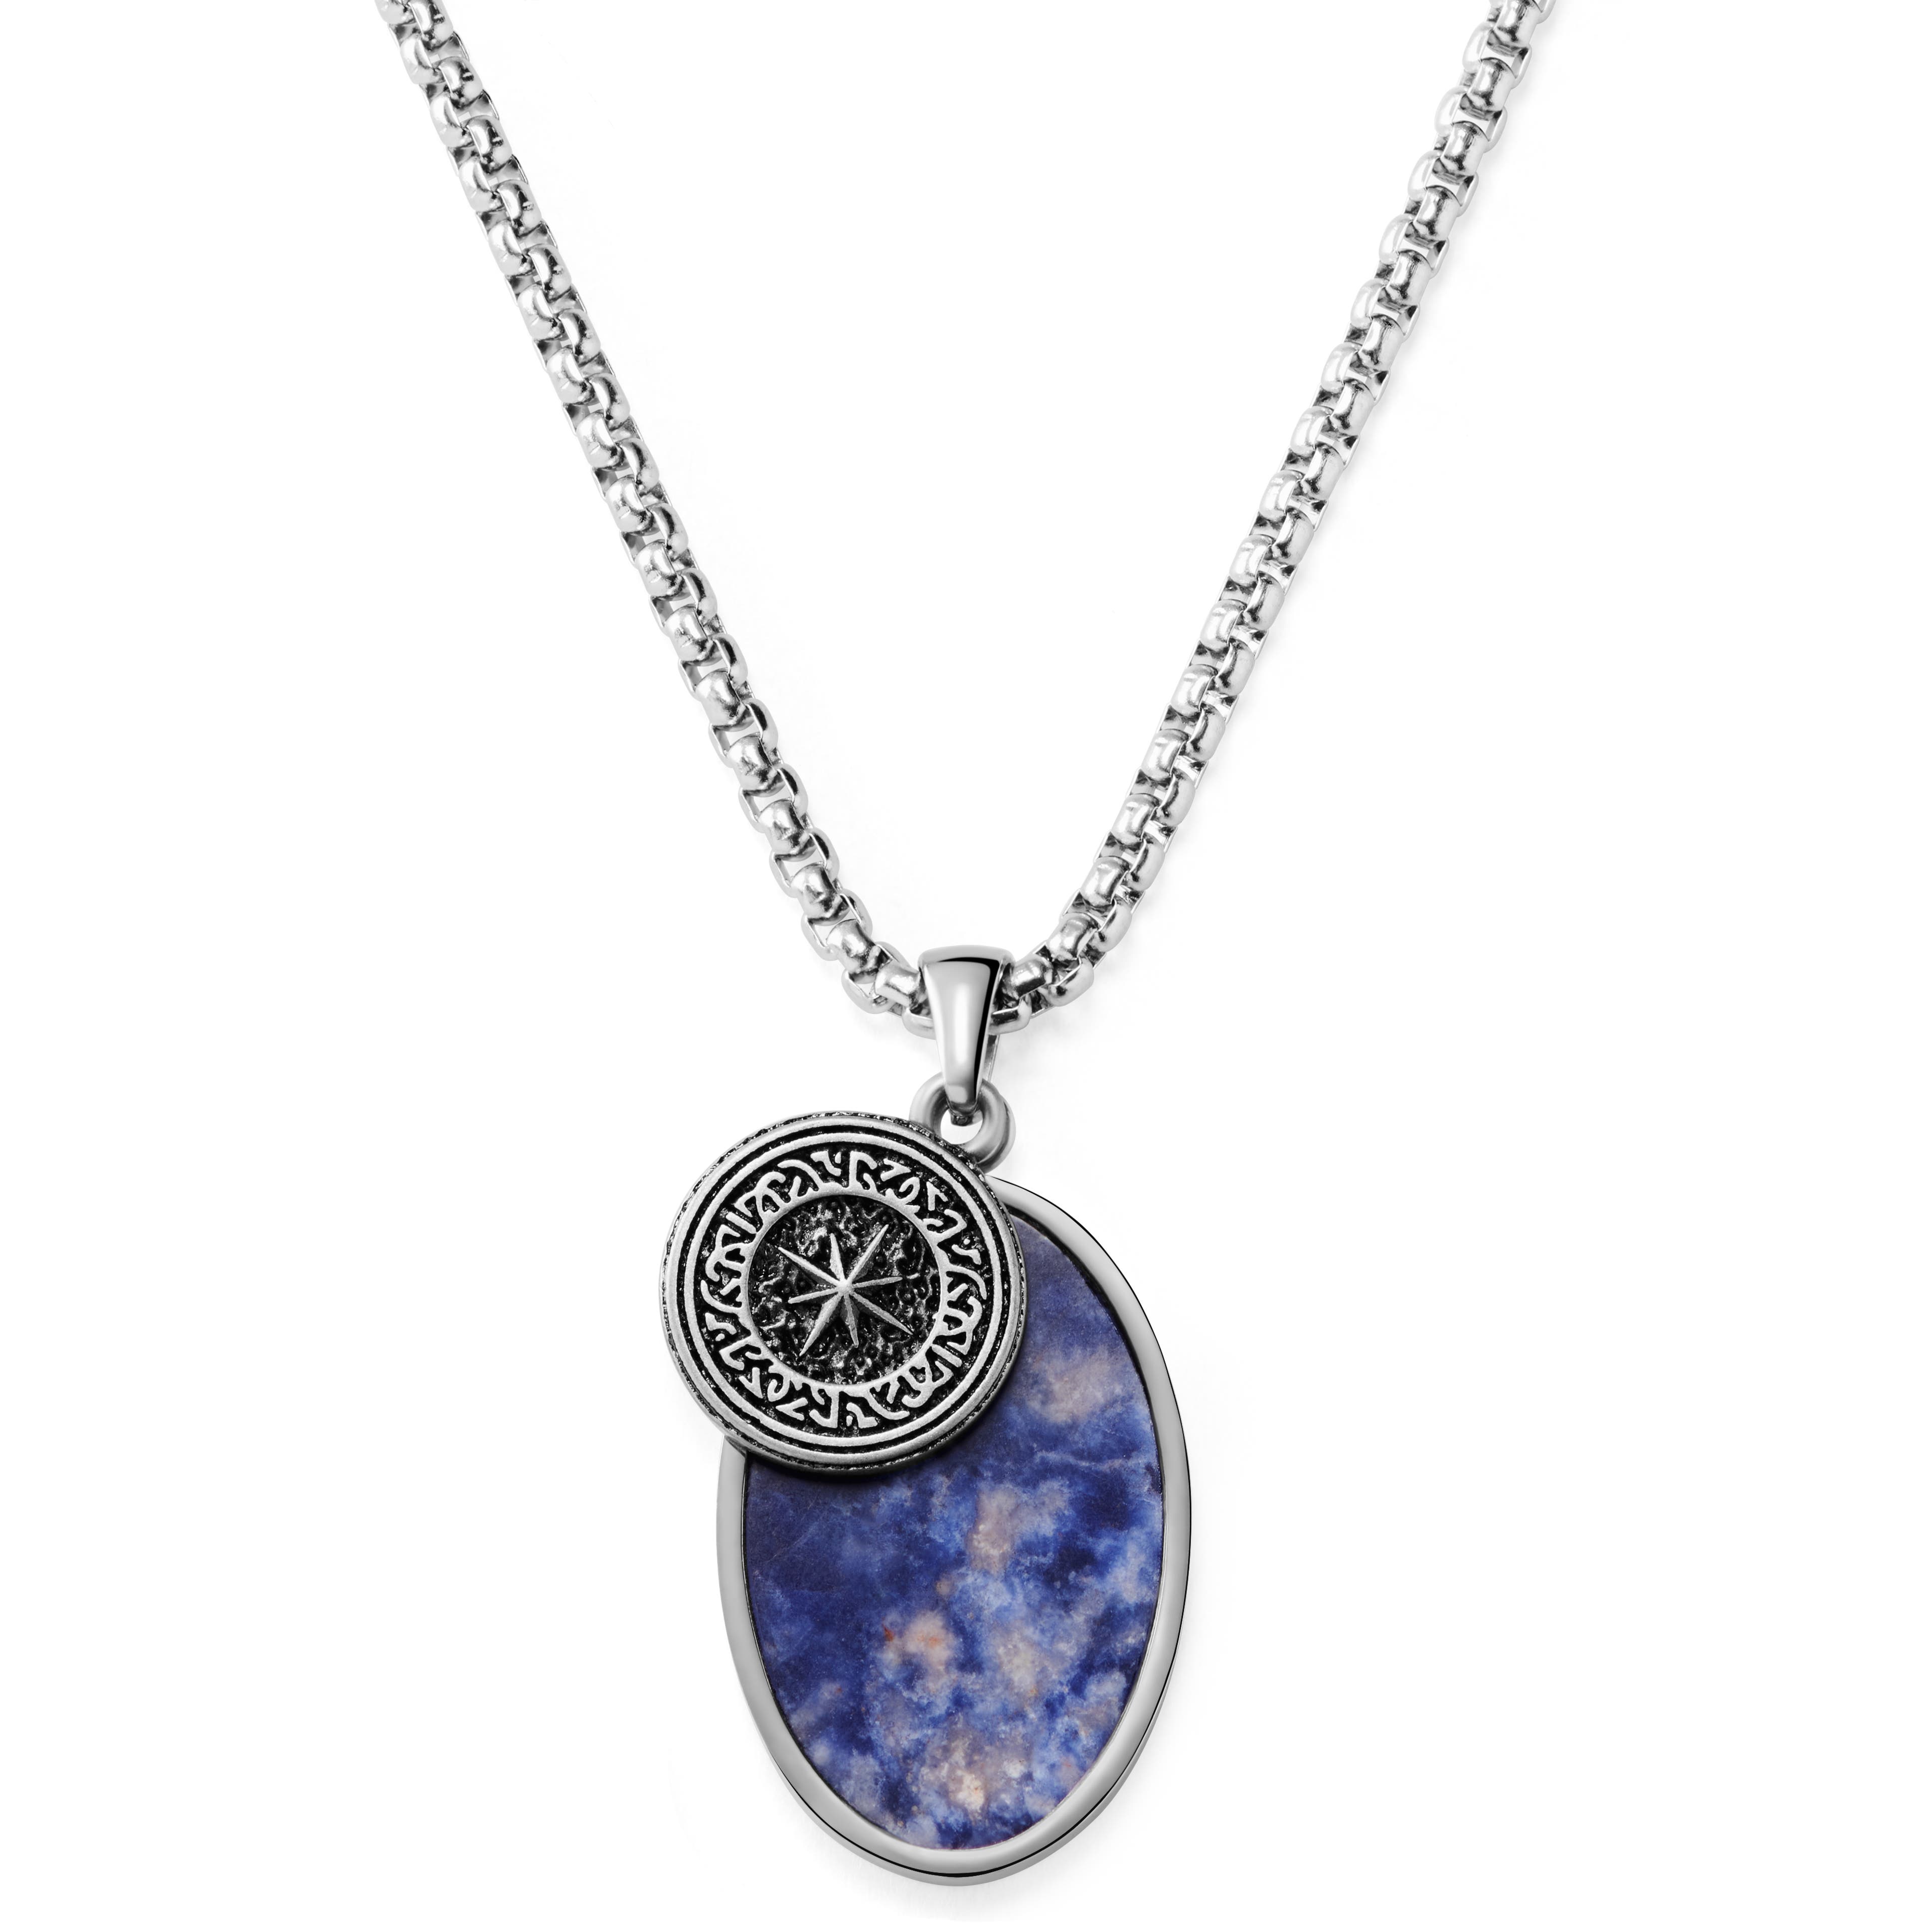 Orisun | Silver-Tone Stainless Steel & Blue Sodalite Oval Box Chain Necklace